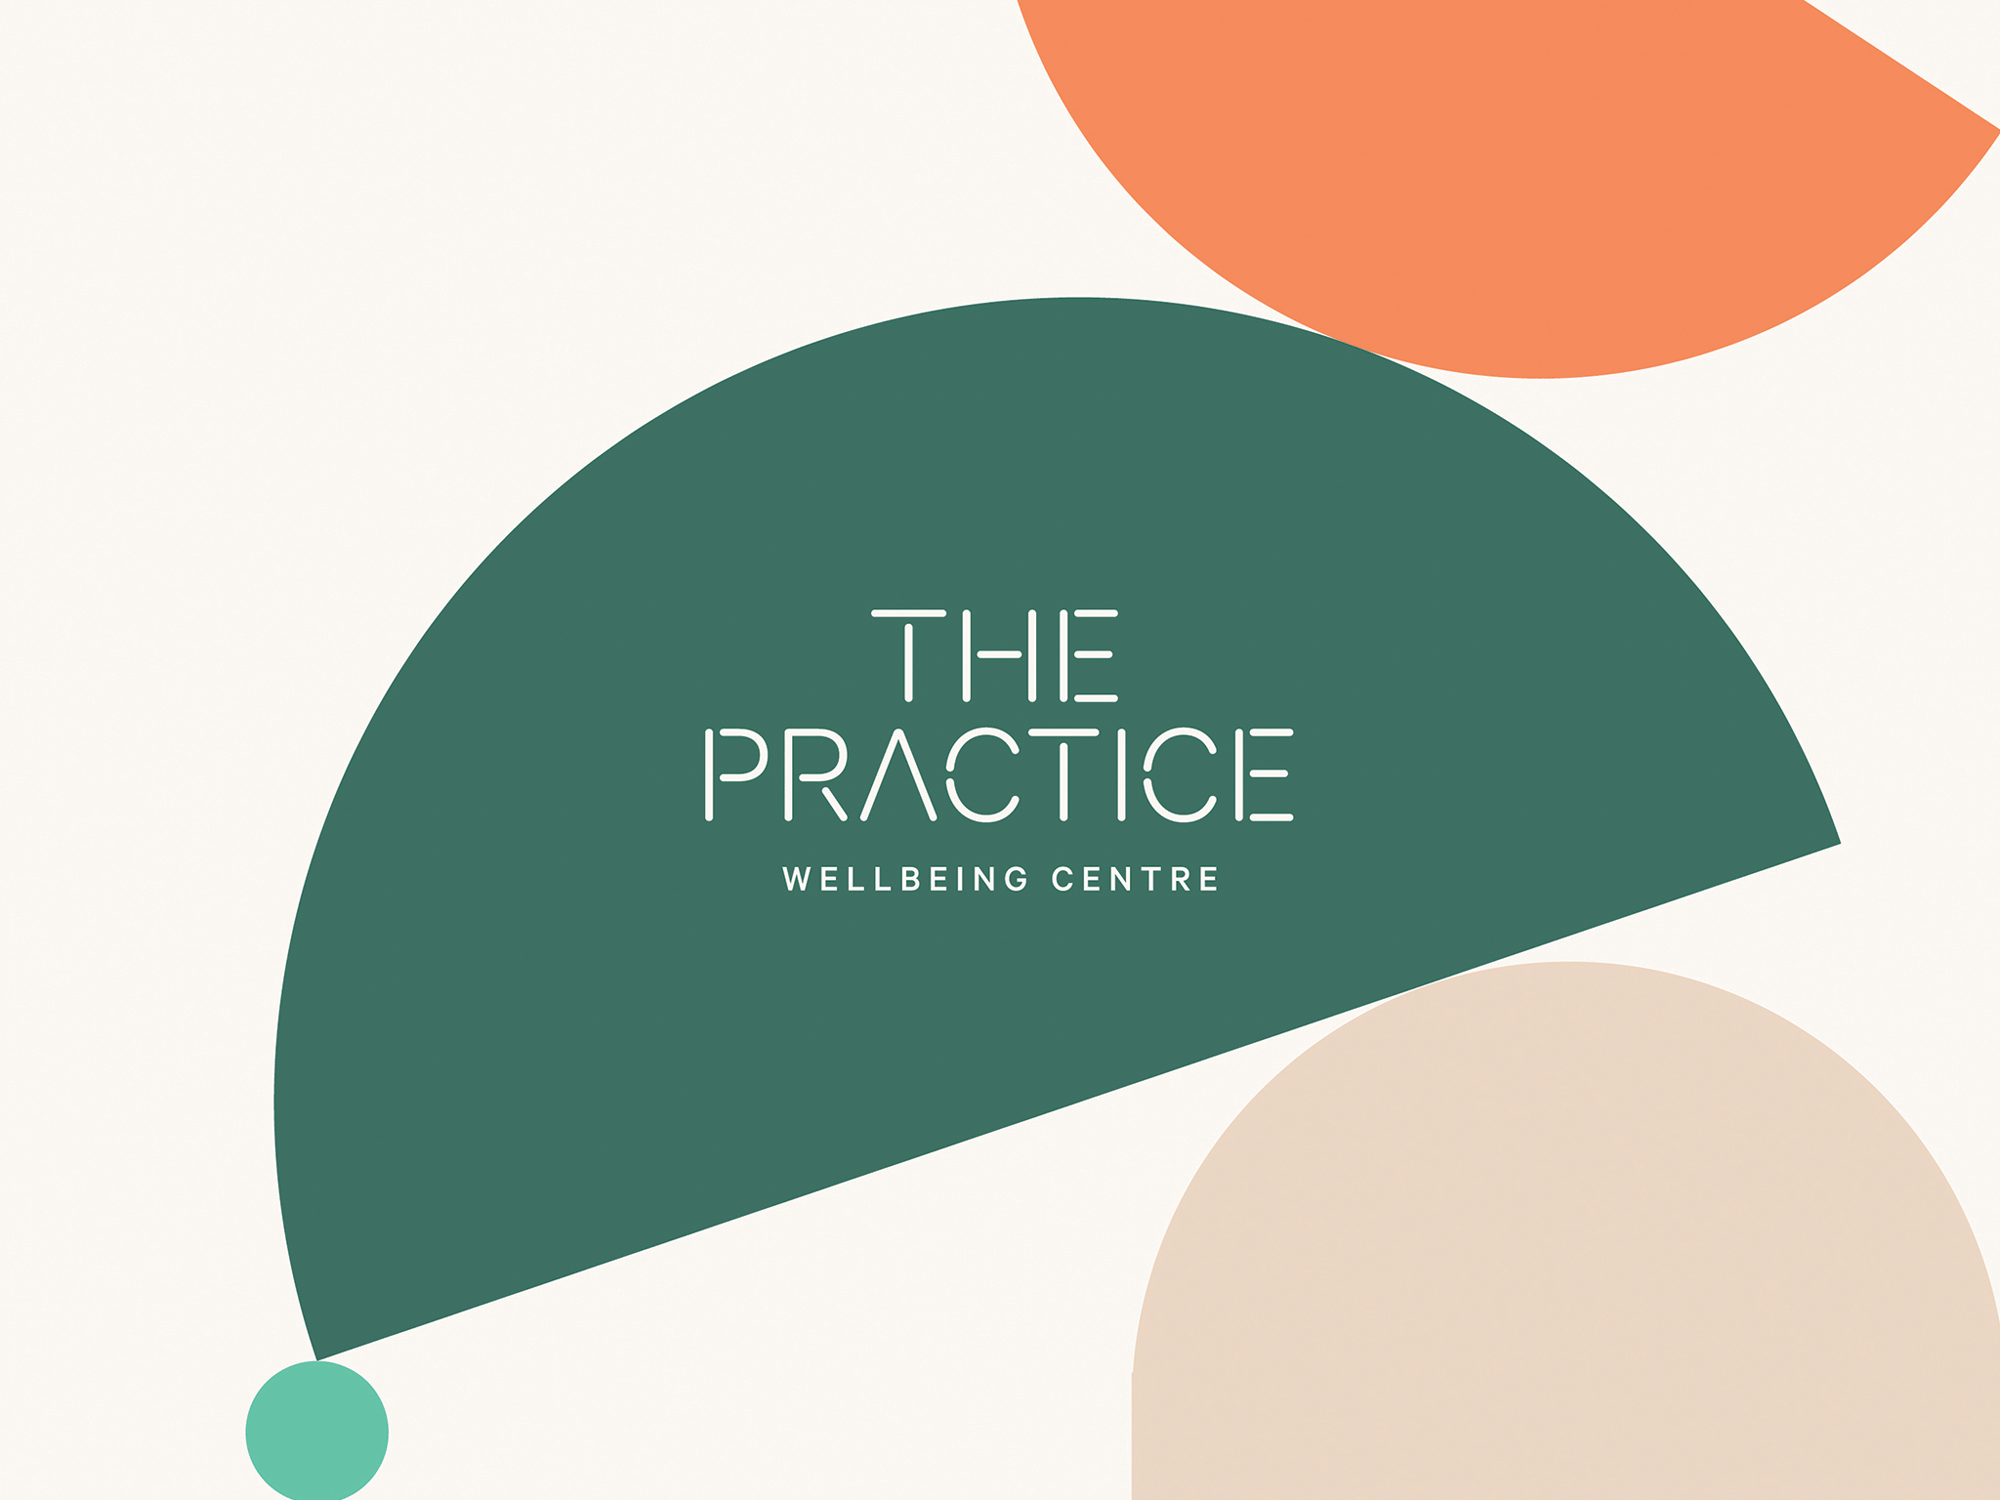 New Name, Logo, and Identity for The Practice by SomeOne